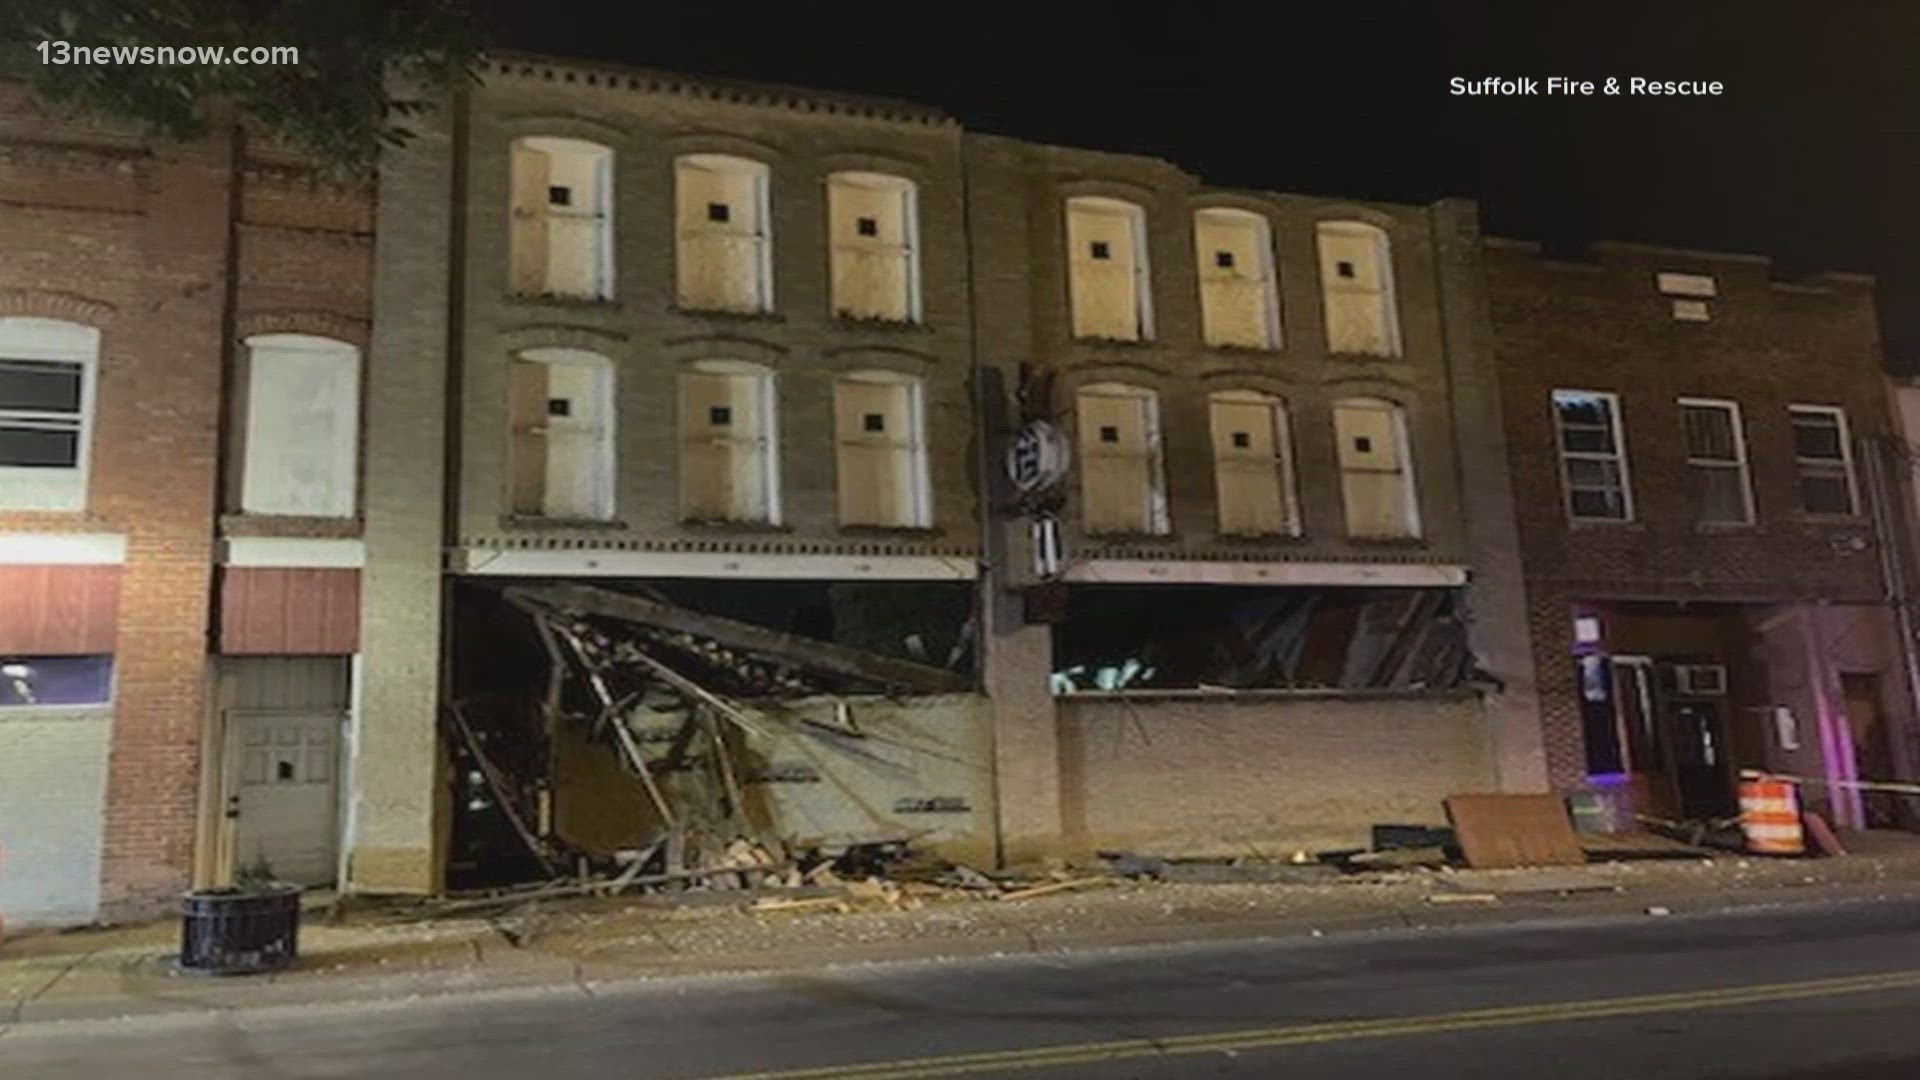 Suffolk Fire & Rescue officials say they received a report of a building collapse in the 300 block of E. Washington Street Sunday around 10:05 p.m.